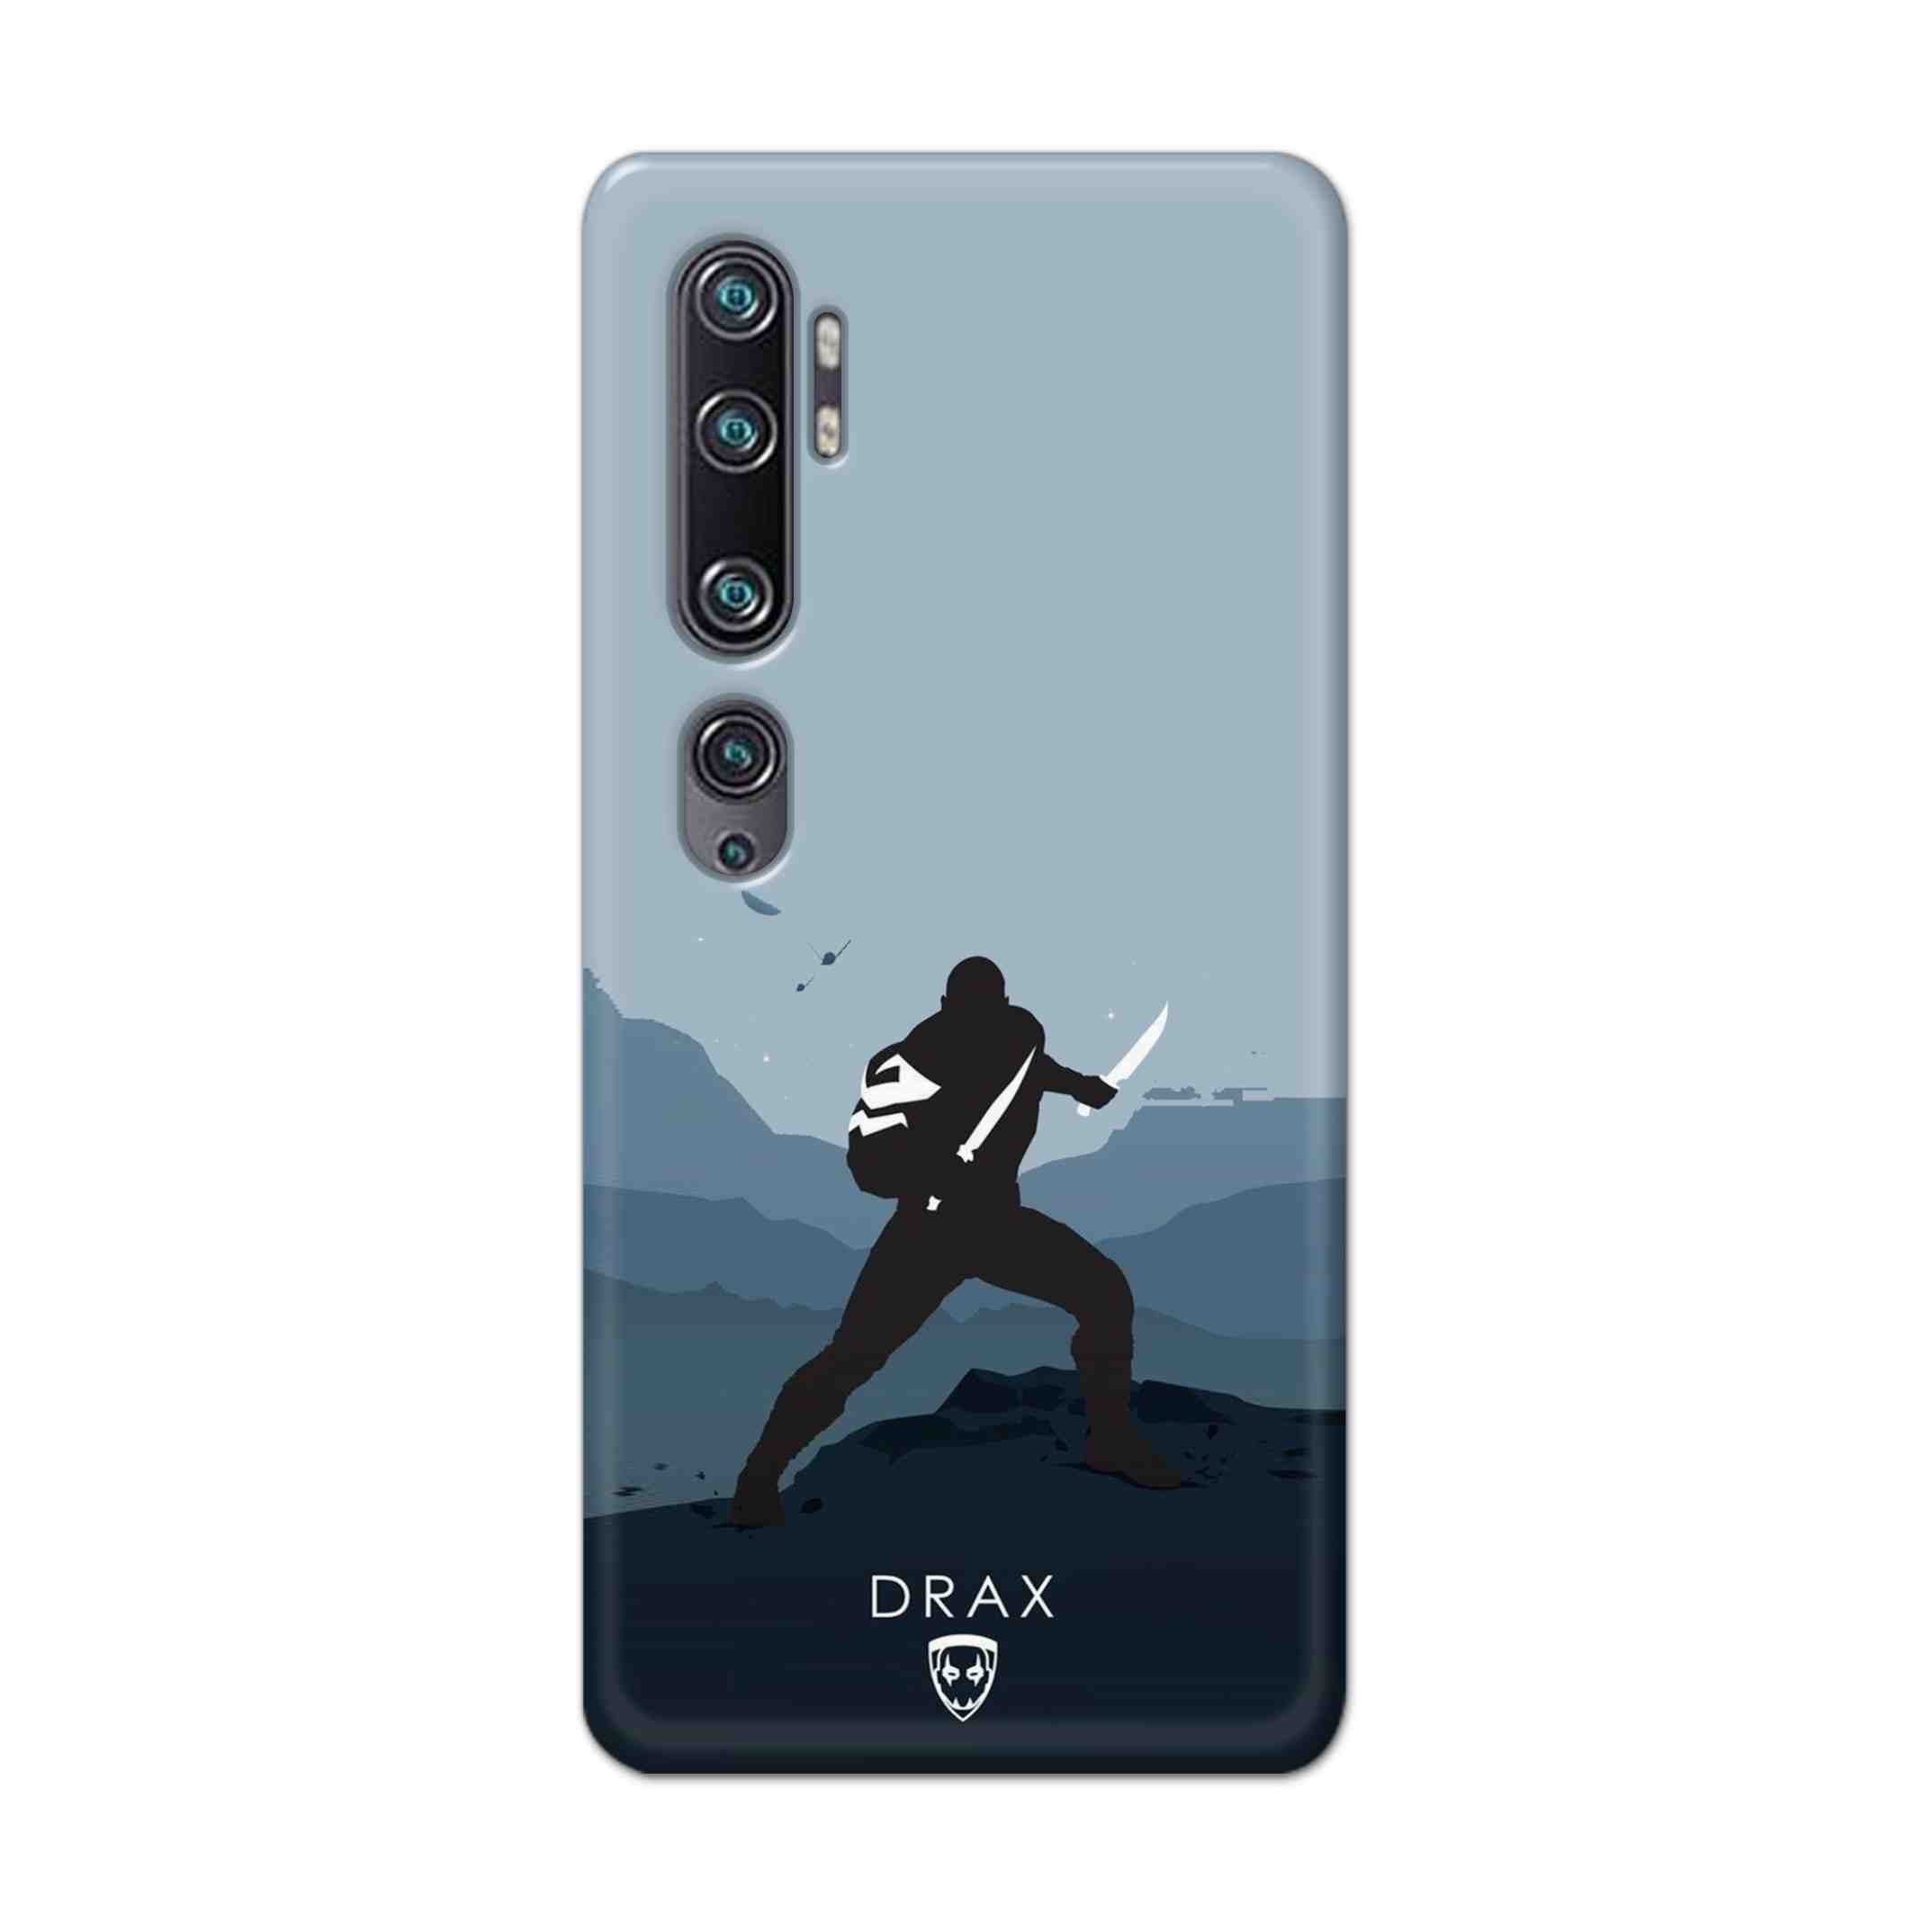 Buy Drax Hard Back Mobile Phone Case Cover For Xiaomi Mi Note 10 Online